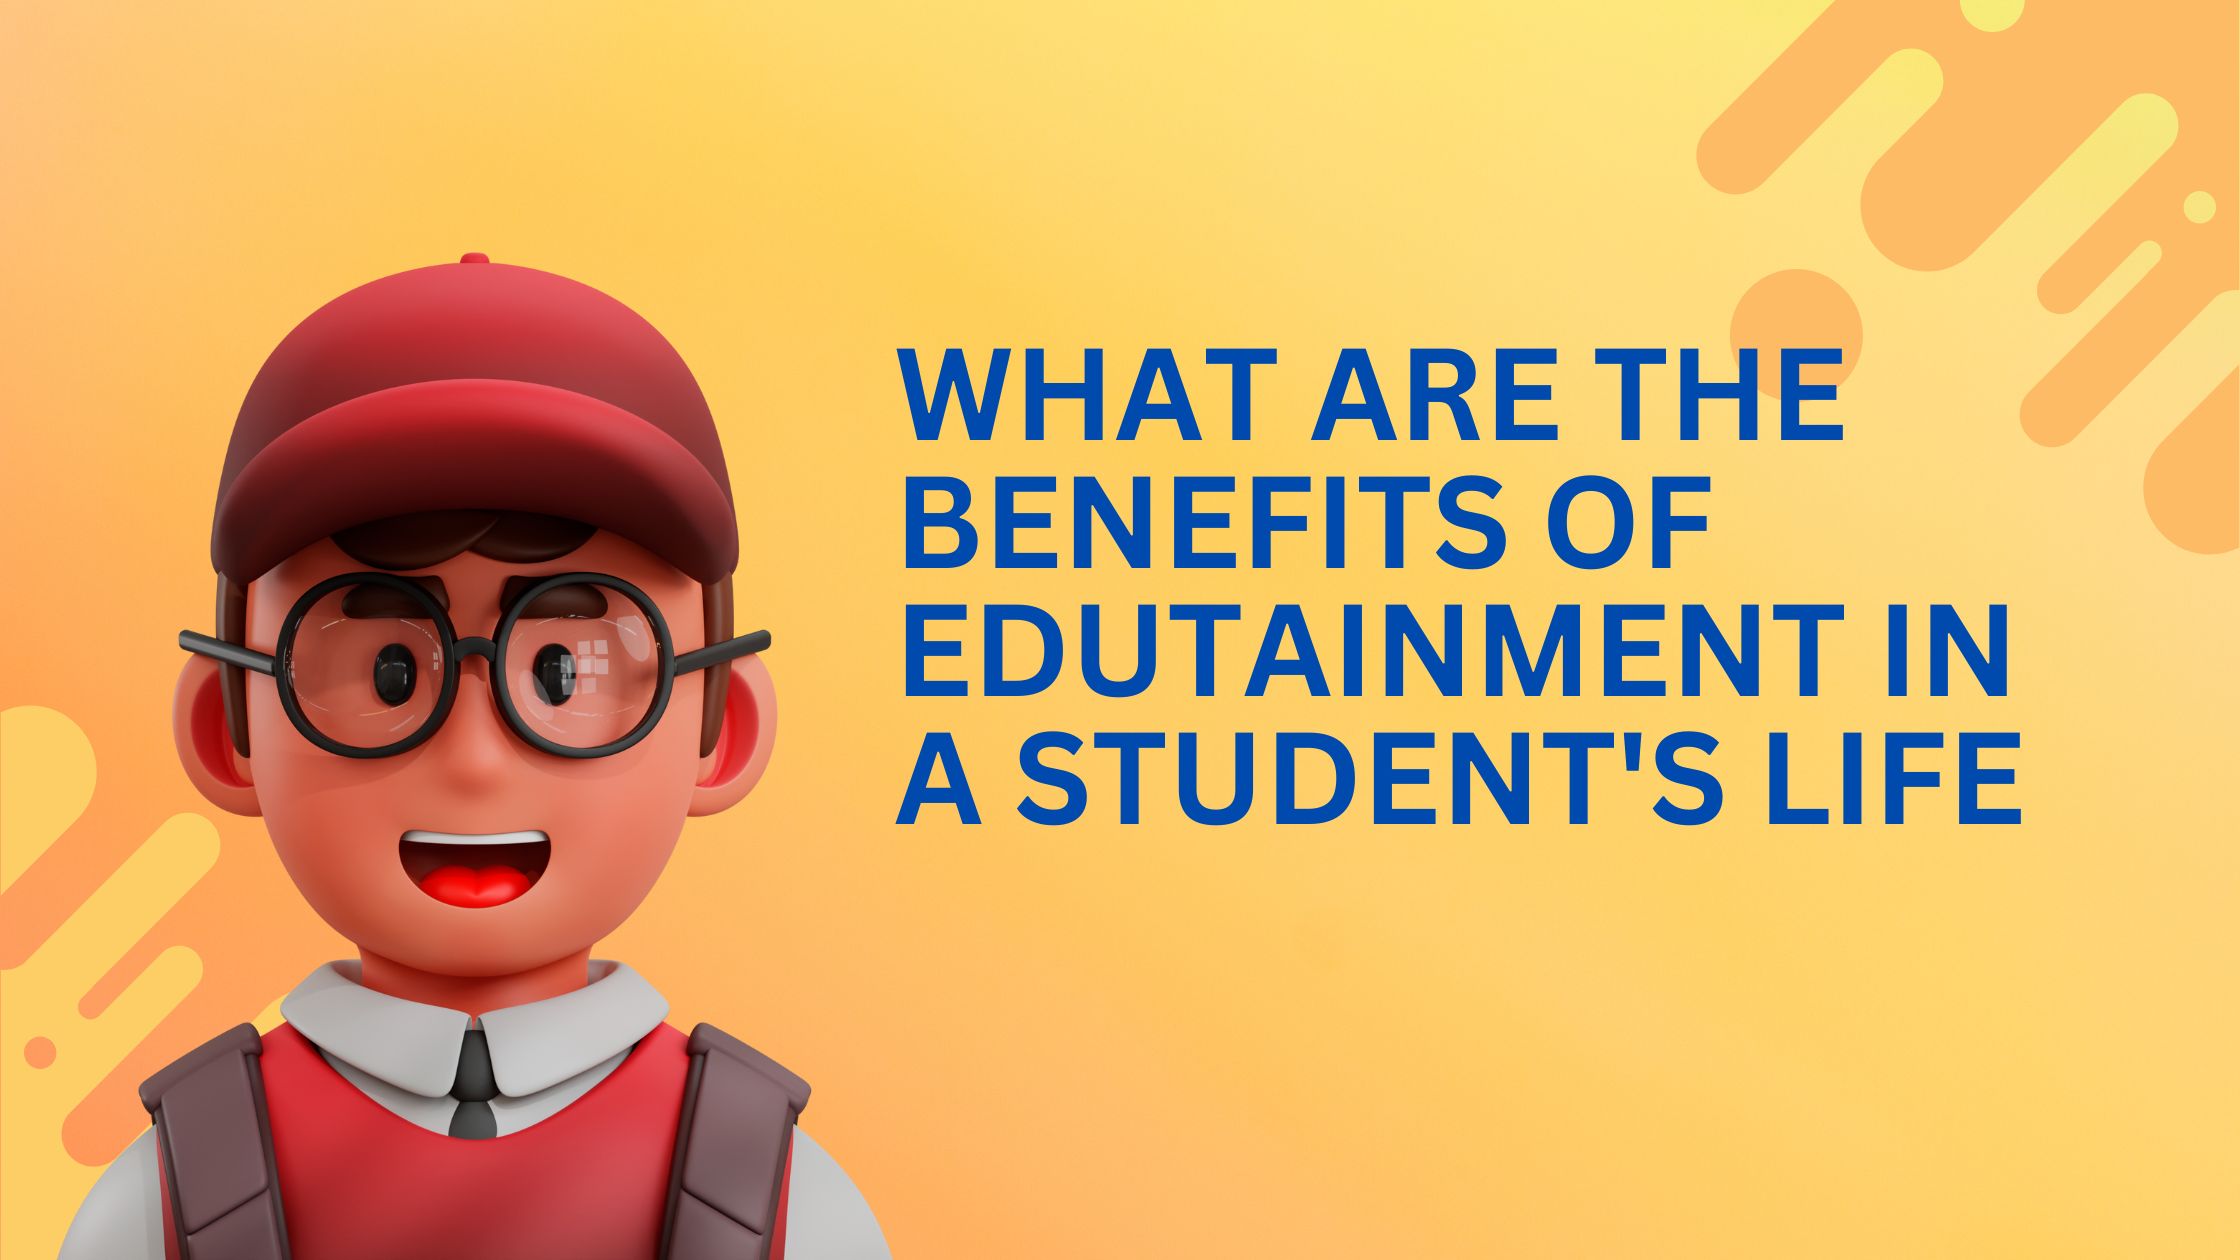 What are the benefits of edutainment in a student’s life